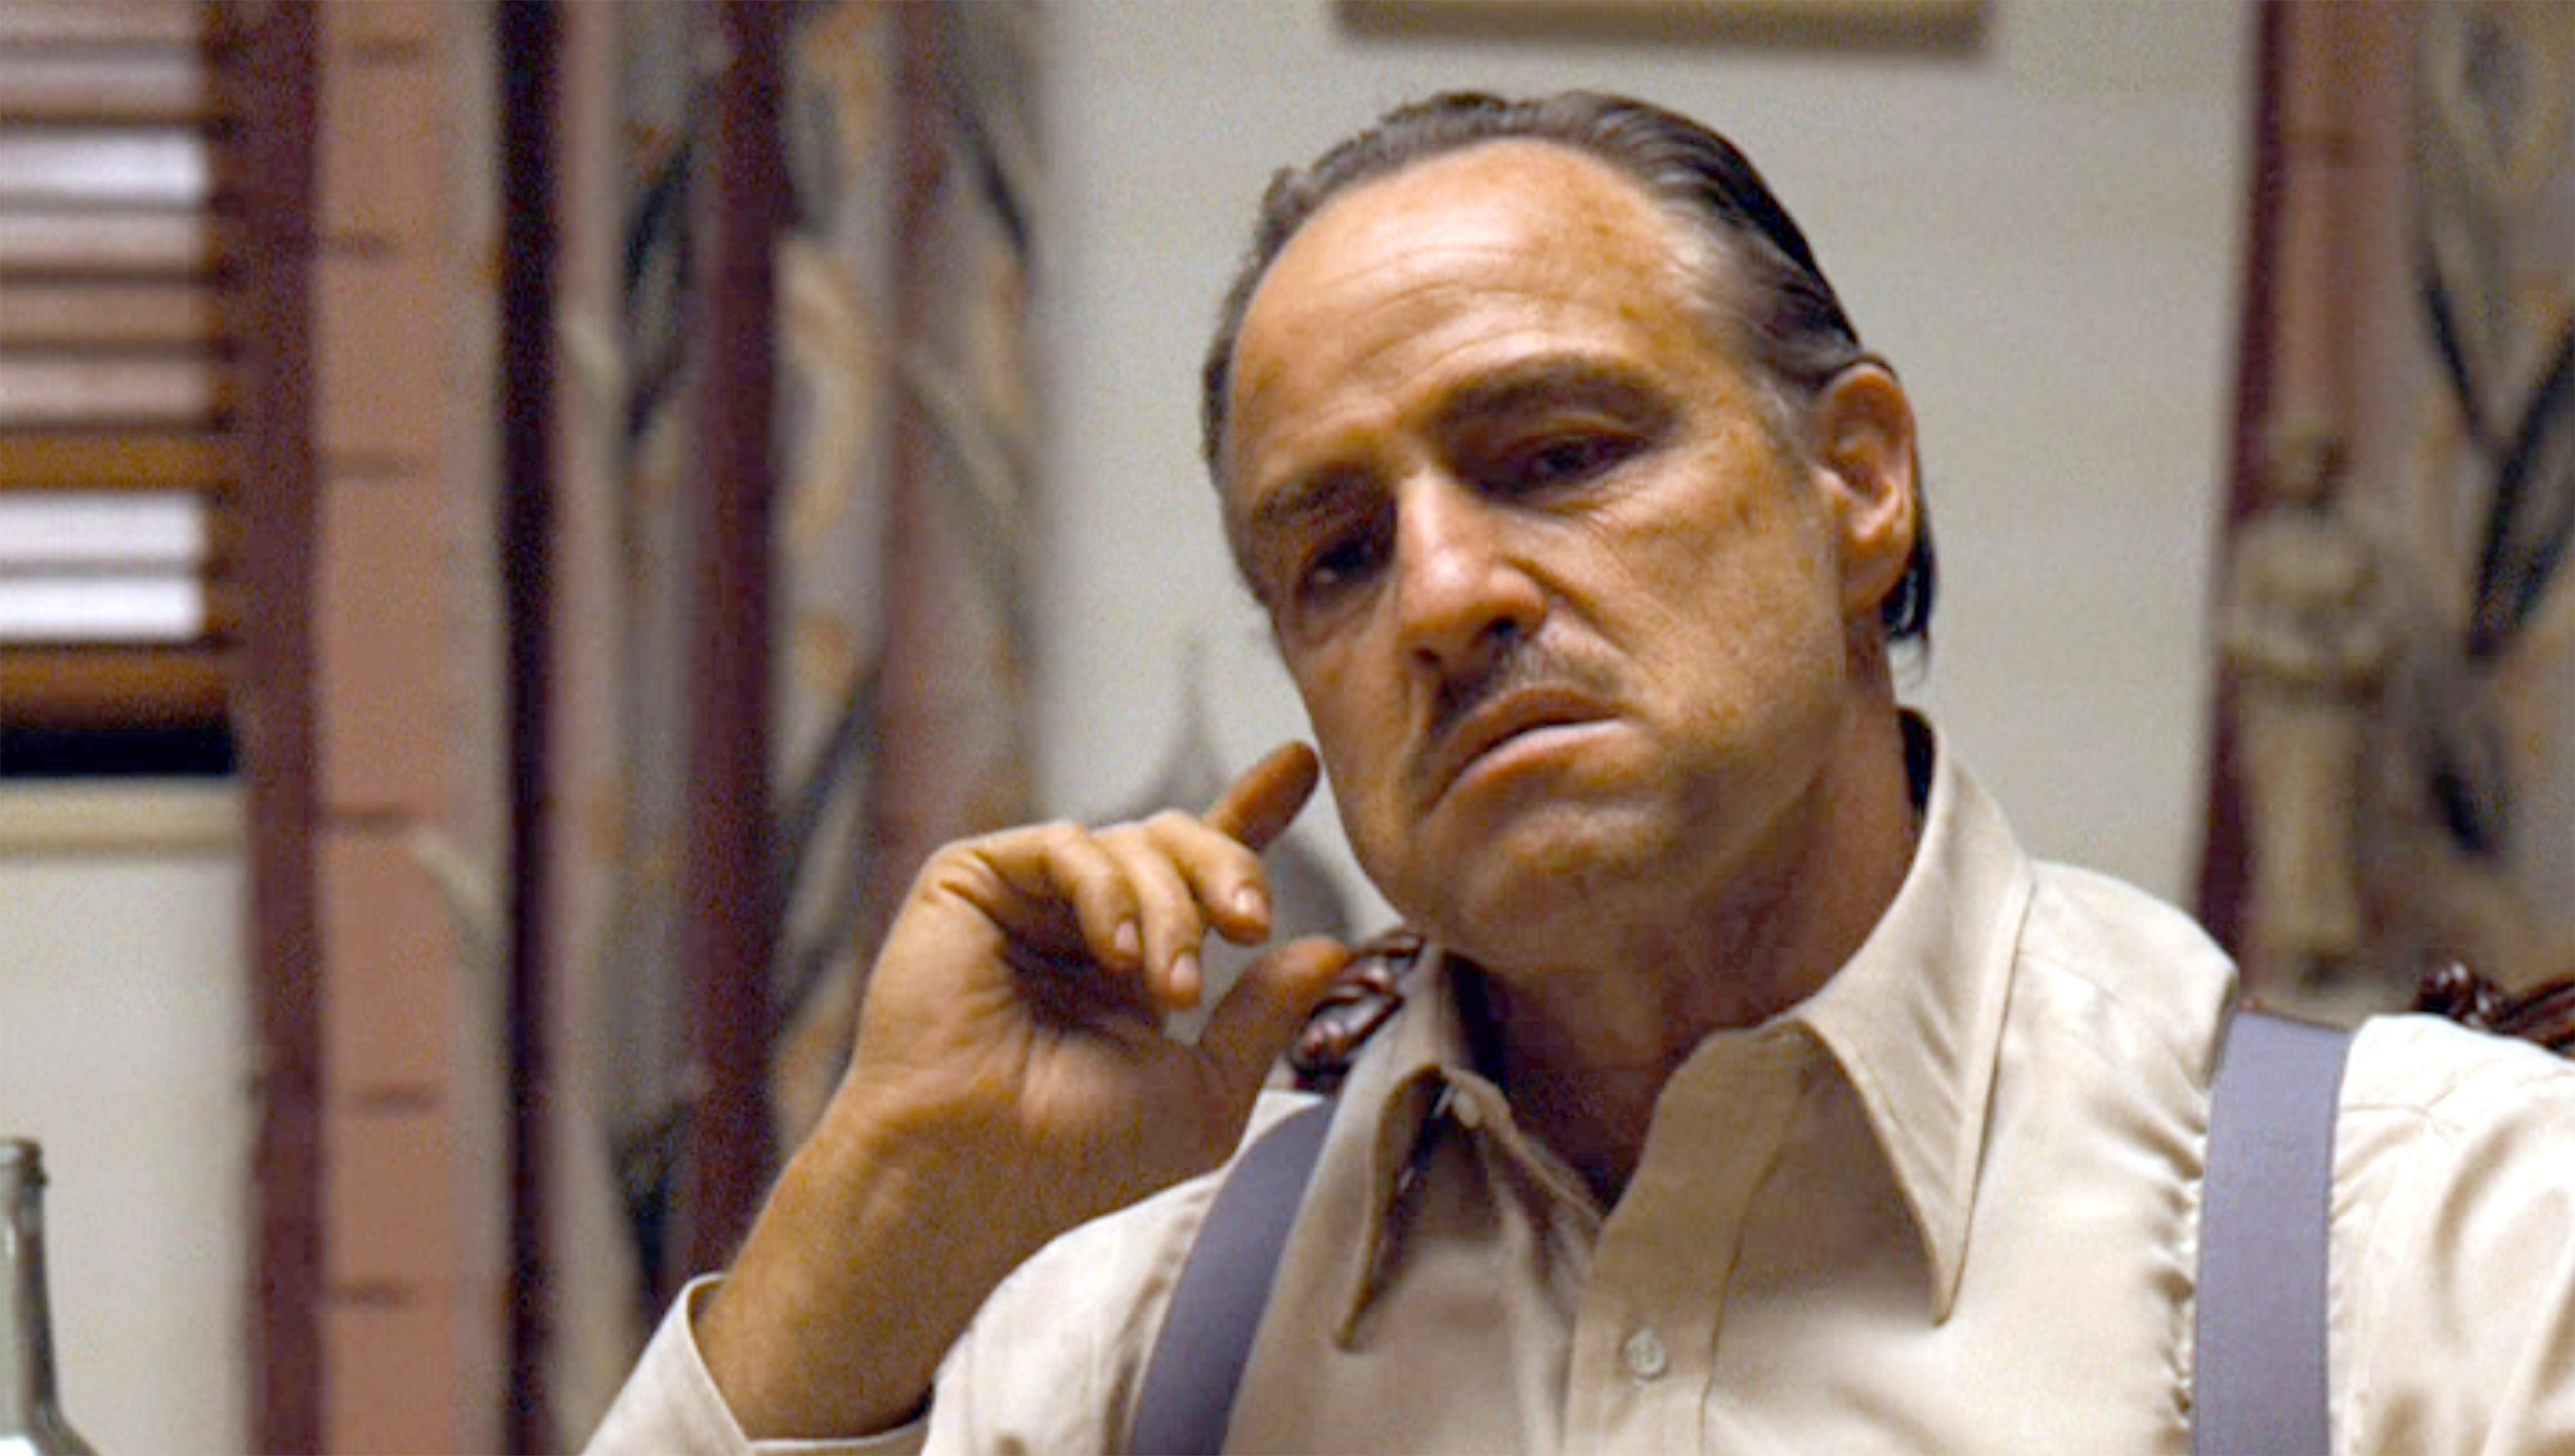 CLOTHING PIECE of Marlon Brando's THE GODFATHER actor who played Vito Corleone 